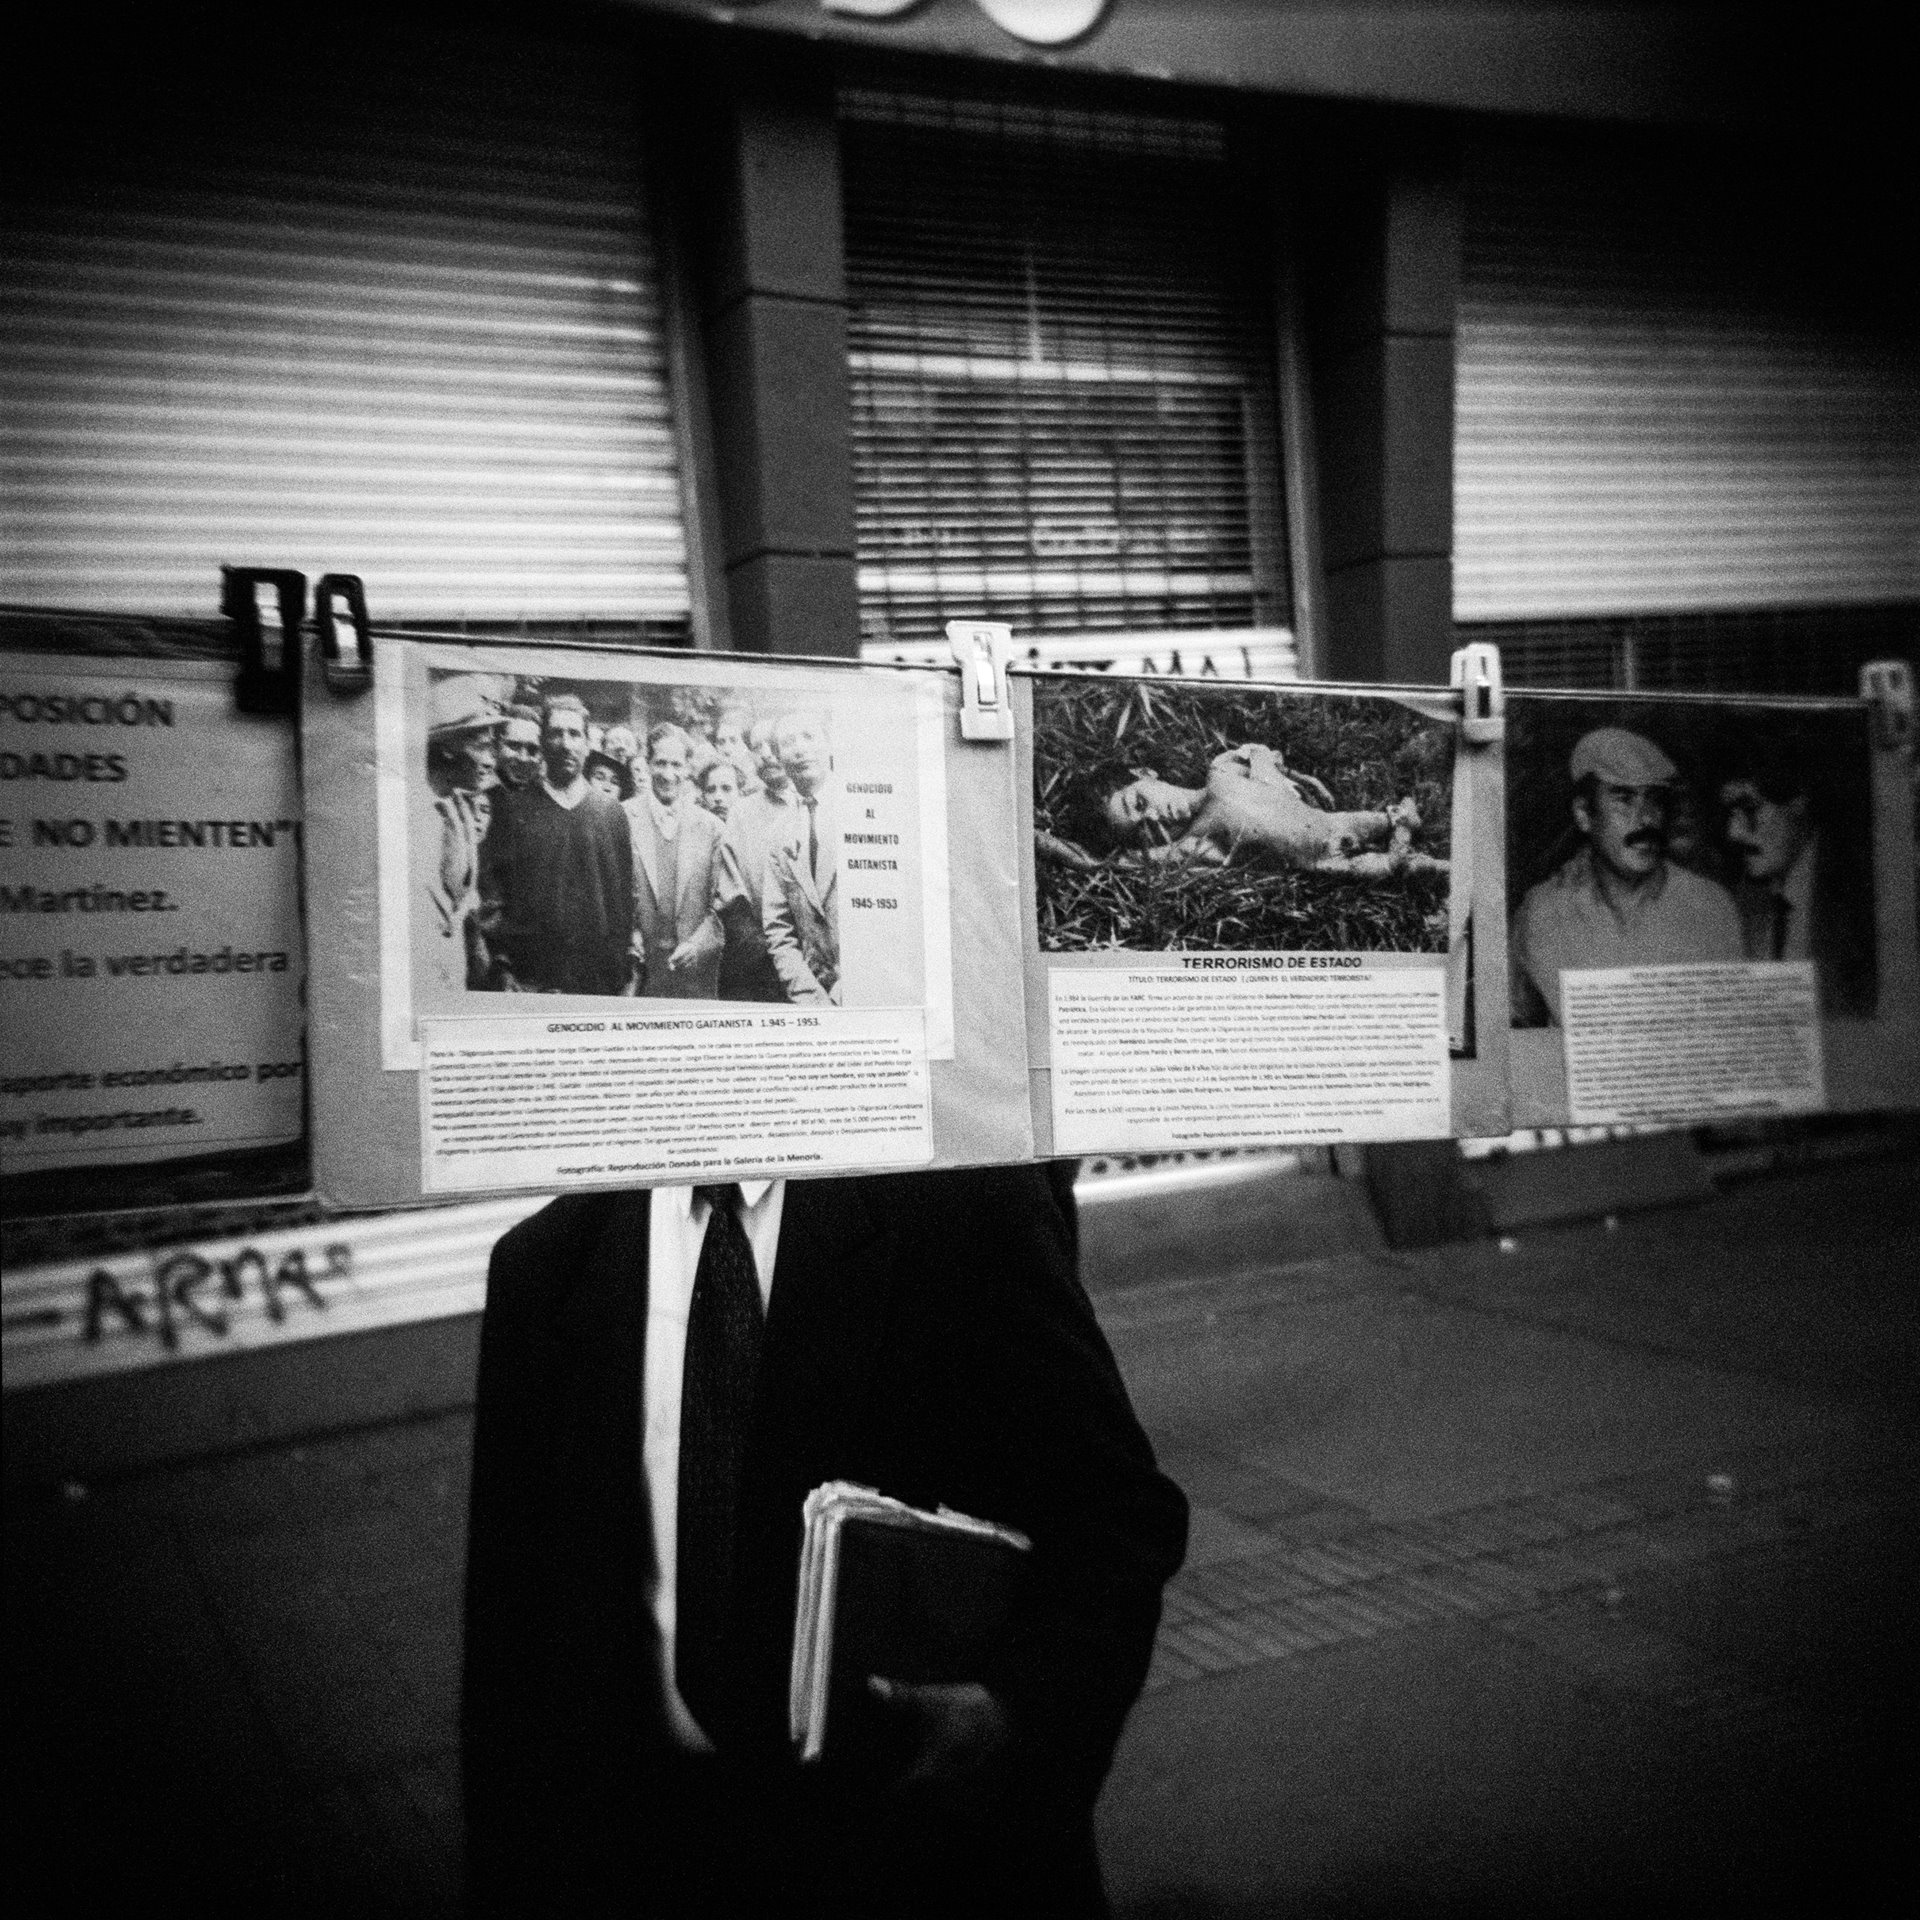 A passer-by looks at photos relating to Colombia&rsquo;s internal conflict, in a street exhibition in Bogotá. In the years leading up to 2013, the conflict had resulted in around 220,000 deaths, 80 percent of which were civilians, according to the Historical Memory Group (GMH). Millions of Colombians &ndash; some 15 percent of the population &ndash; had been displaced.